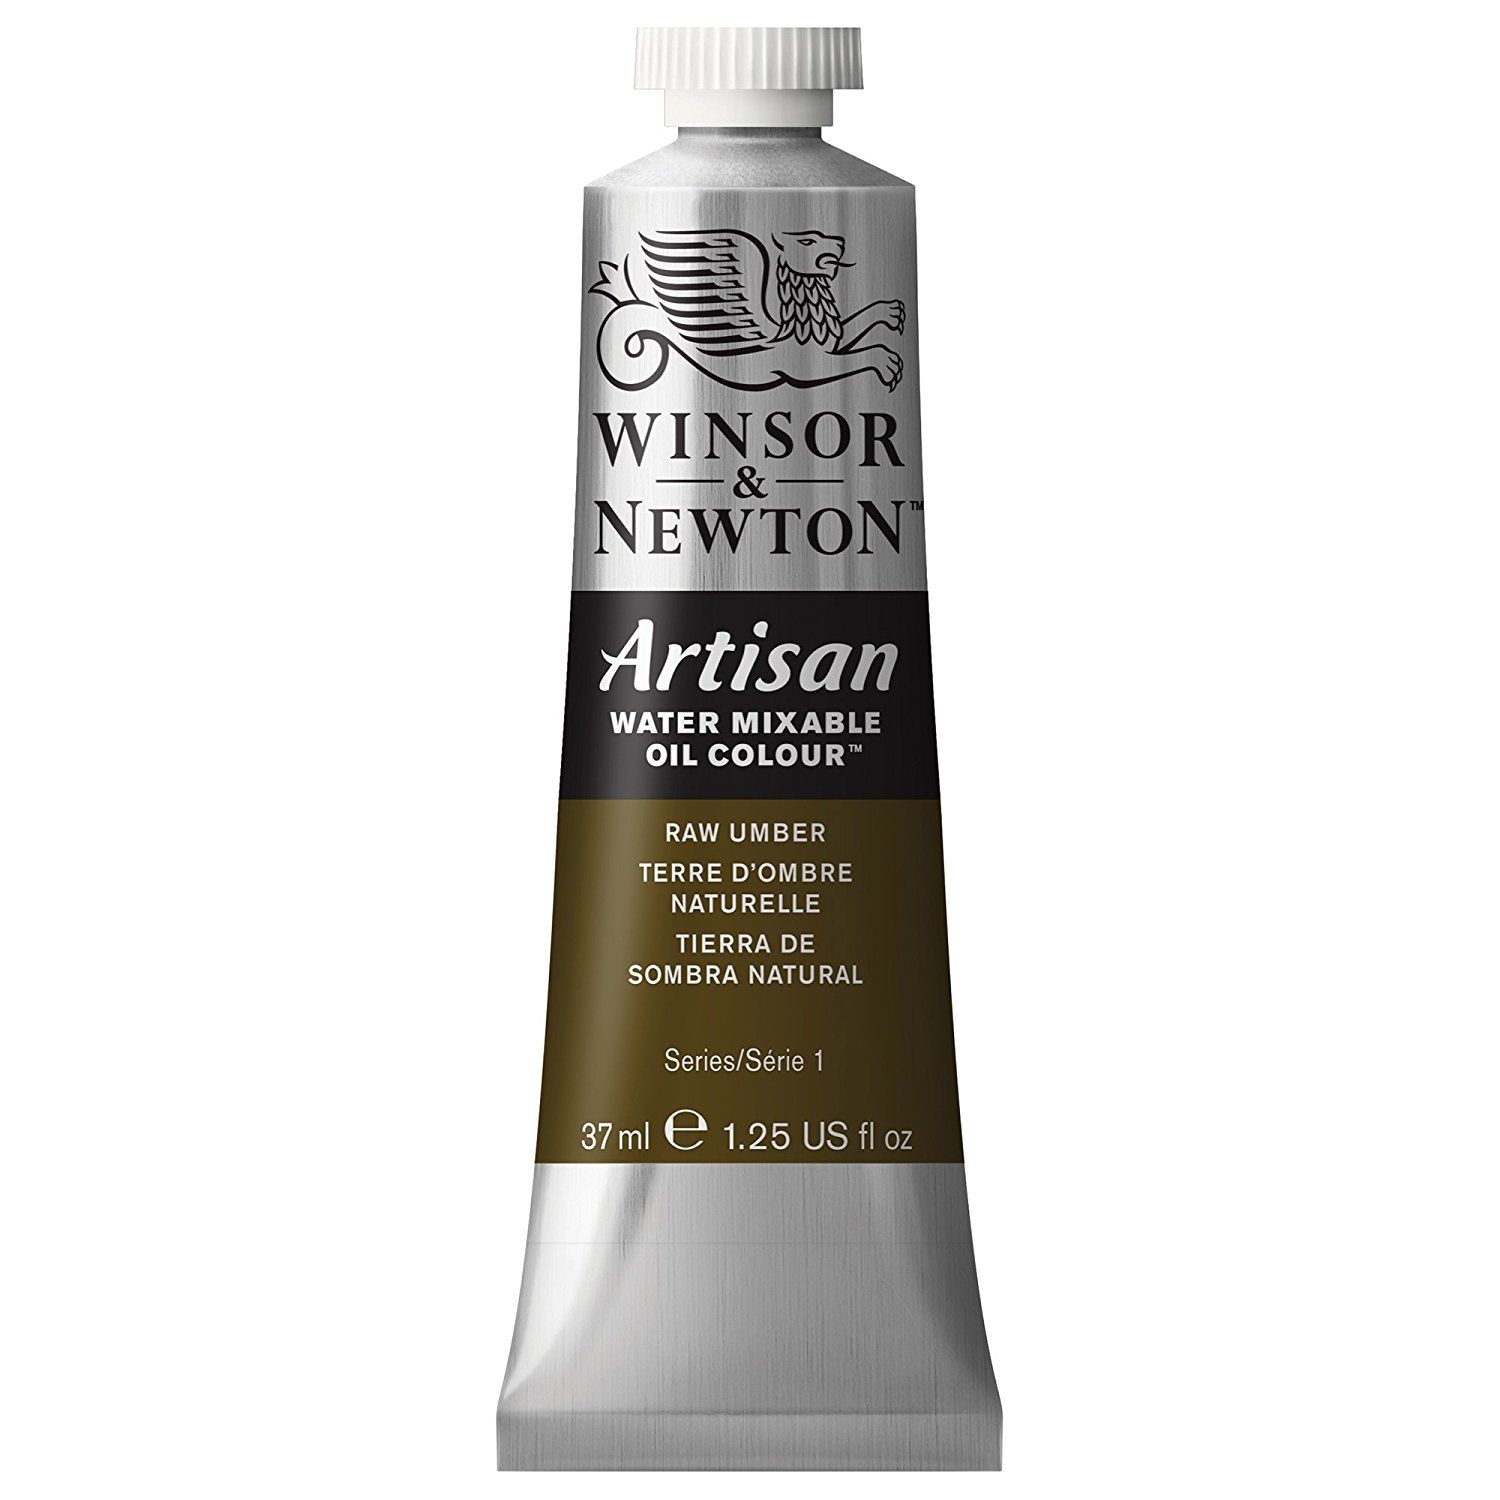 Artisan Water Mixable Oil - Raw Umber 37ml